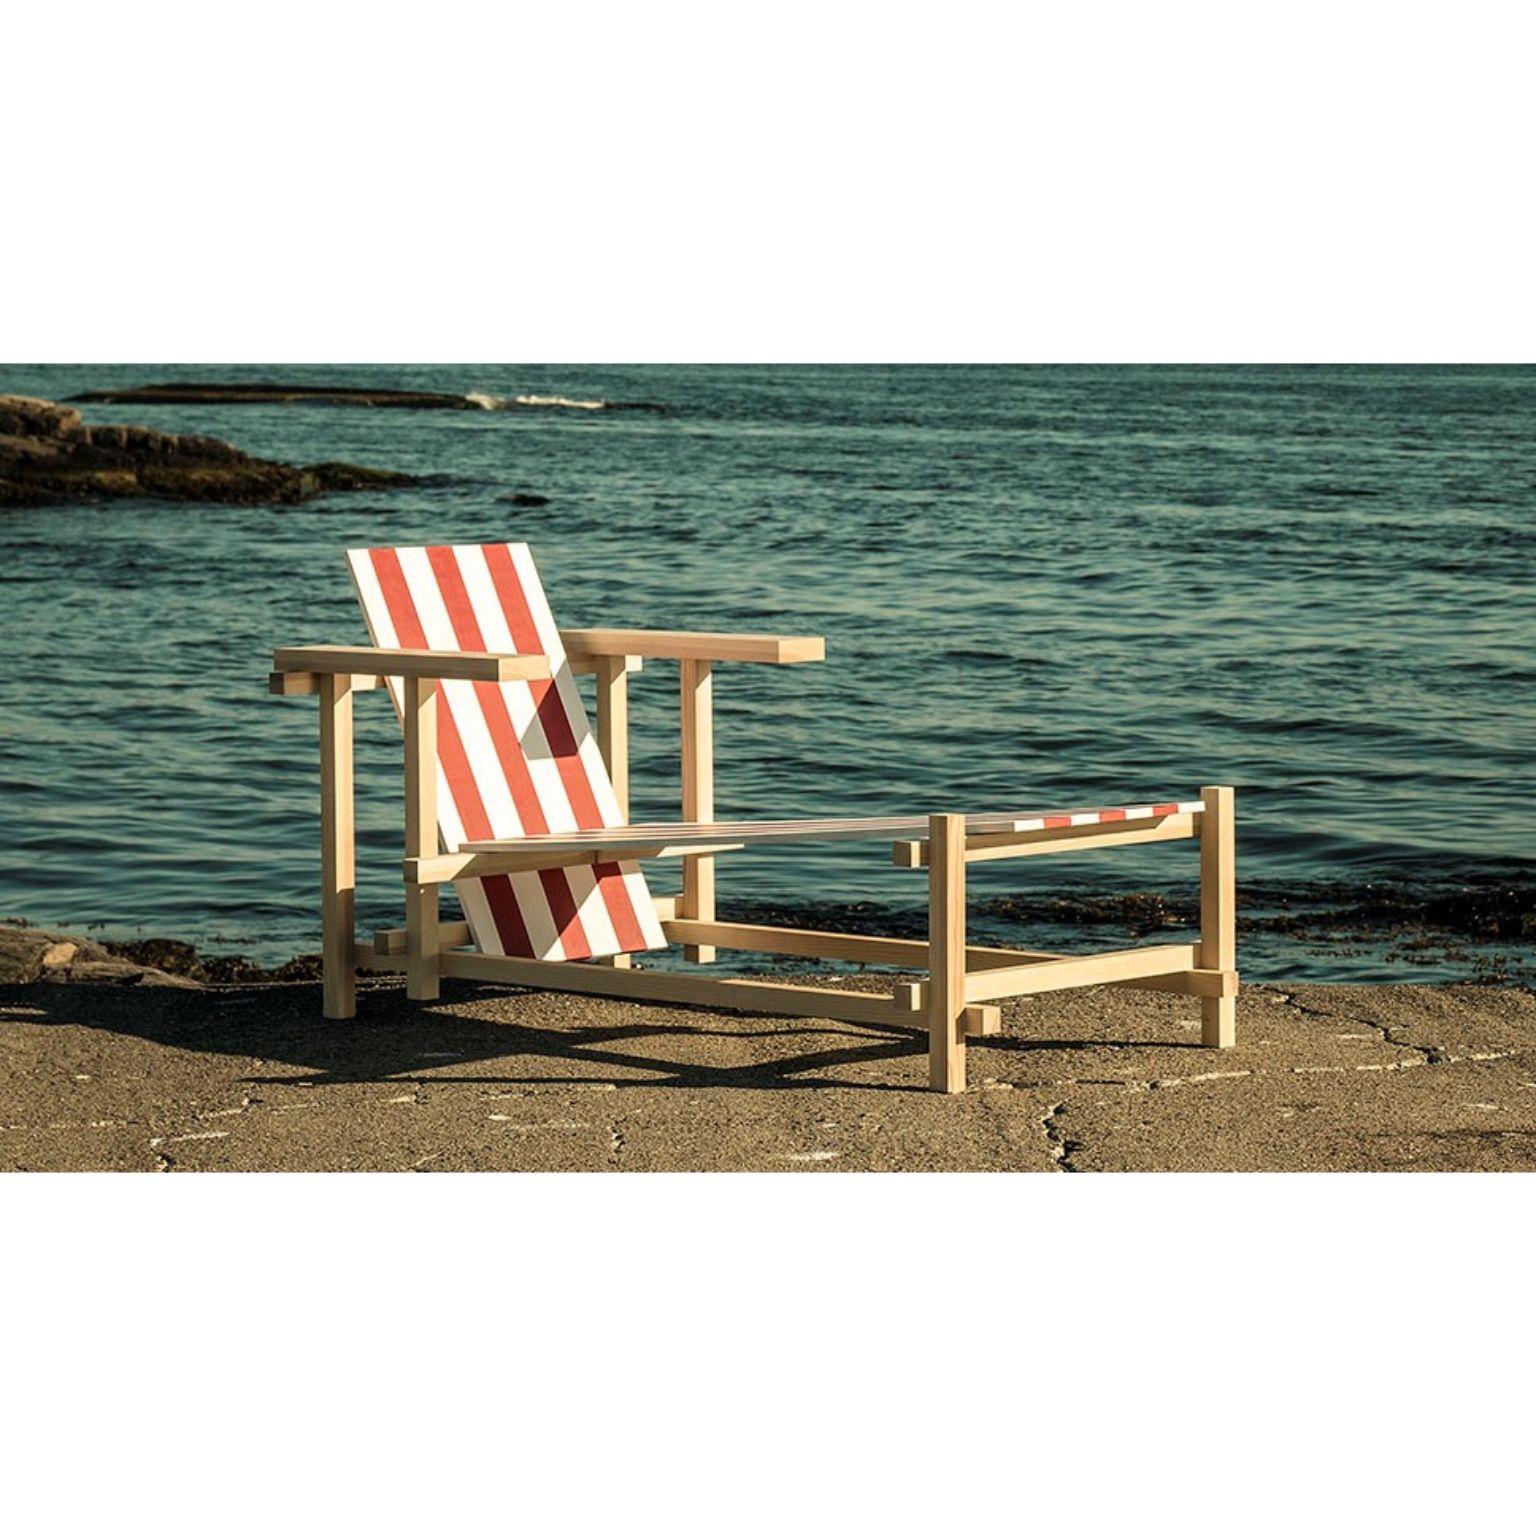 Red and white sunlounger by Edvin Klasson
Limited edition
2015-16
Dimensions: H 66 x W 66 x D 132 cm
Materials: Untreated heart pine, laminated birch plywood, PVC car wrapping film.

Red and White Sunlounger is an evolution of Gerrit